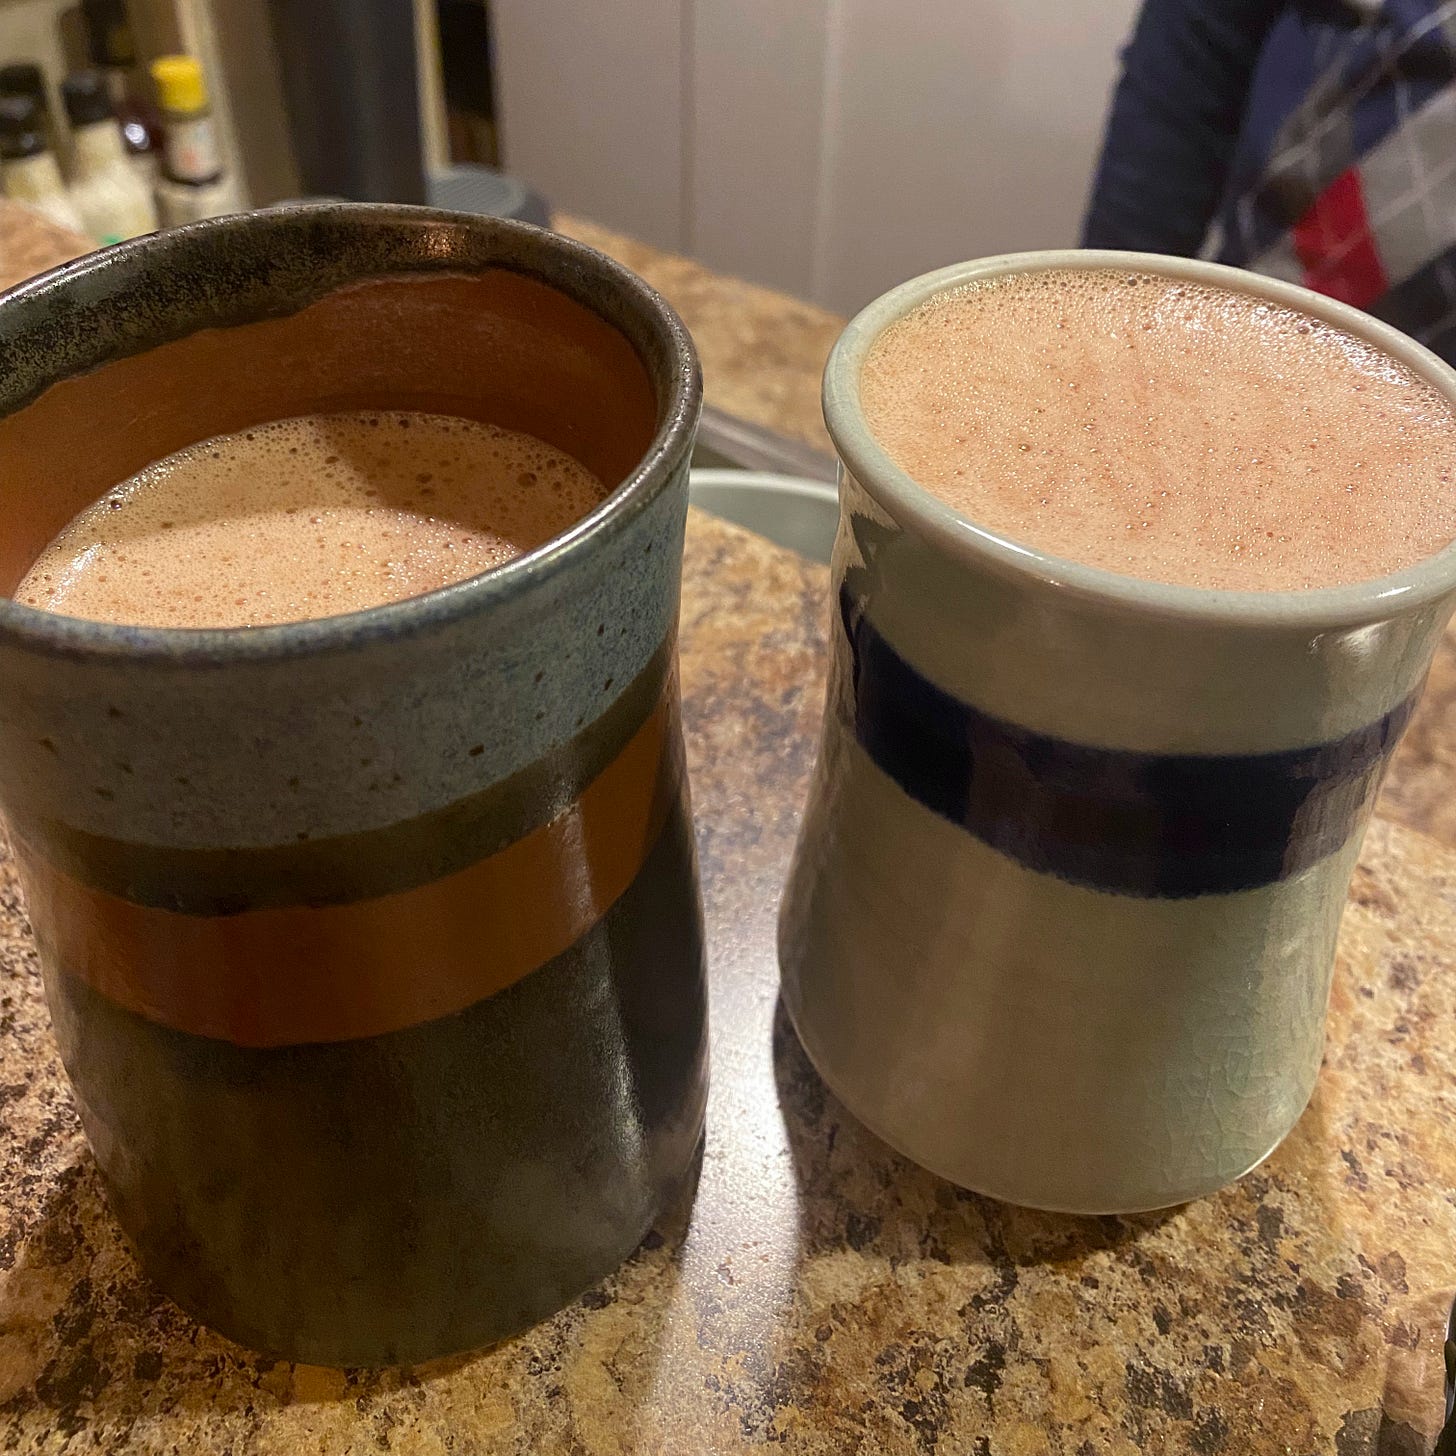 Two ceramic pottery mugs, mismatched but both with a painted stripe around it, filled with hot chocolate. The mug on the right is full to the brim, as it is a little smaller than the mug on the left.